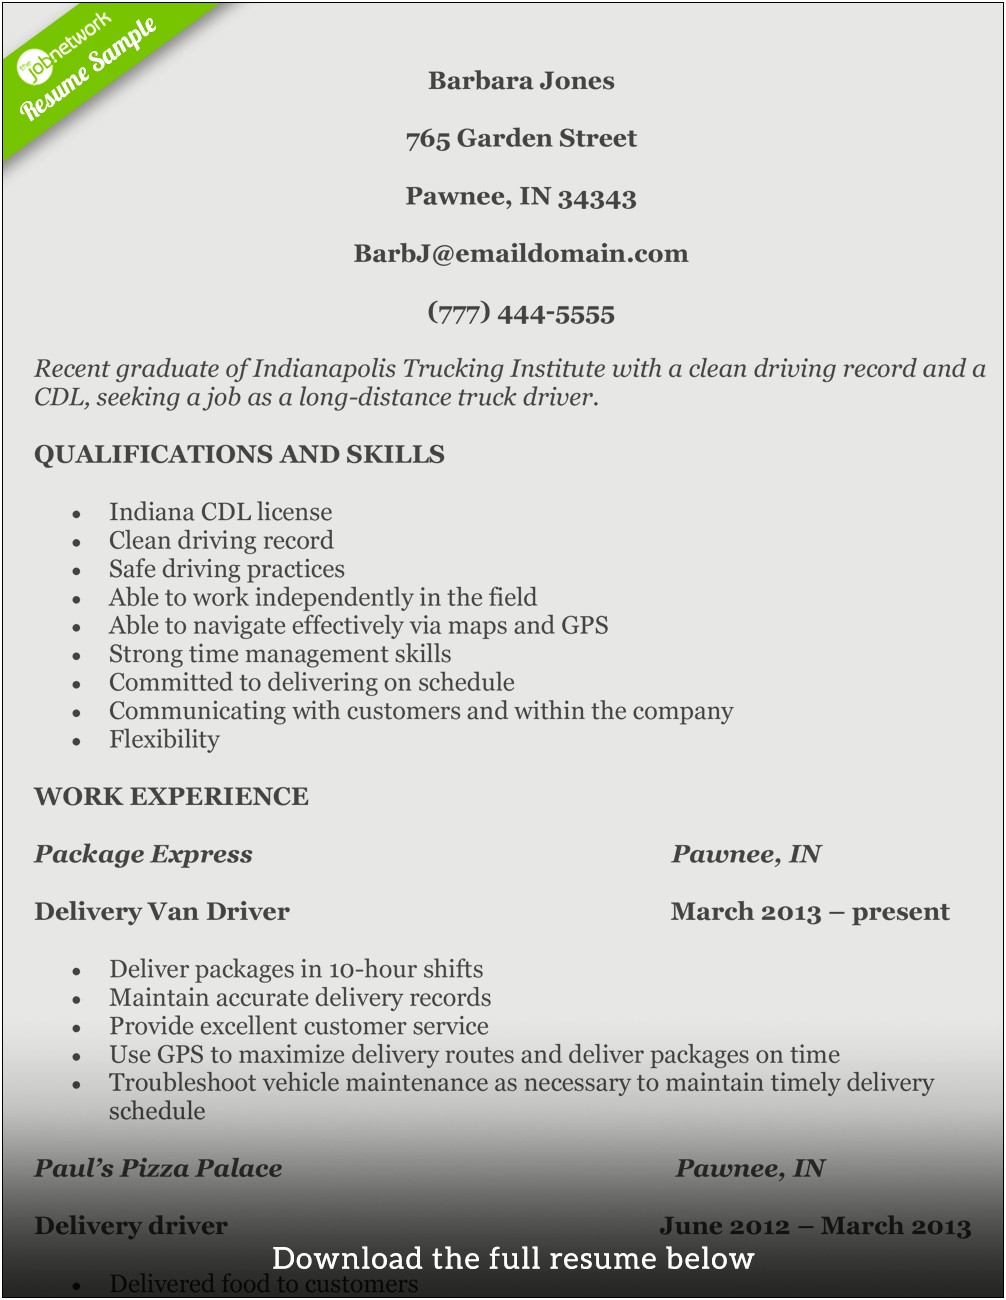 Sample Resume For A Cdl Truck Driver